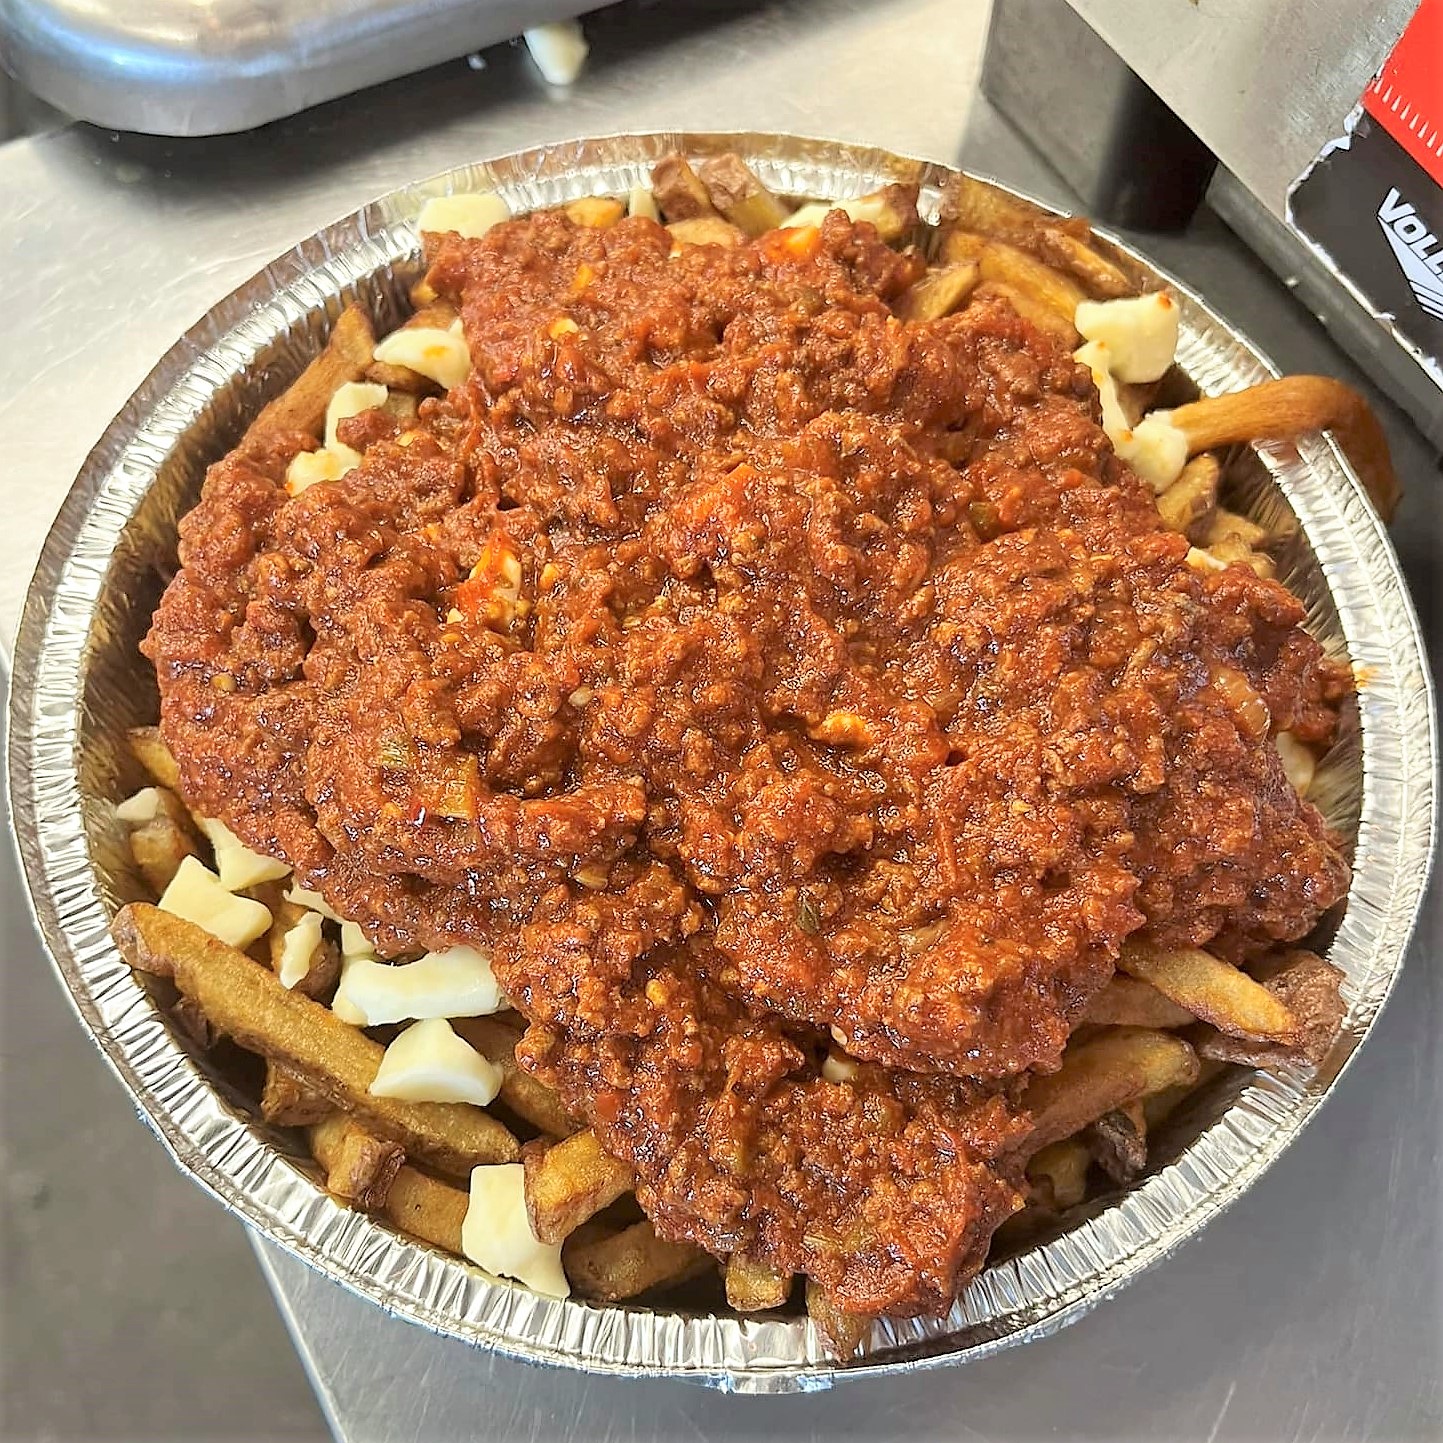 meat sauce piled on a poutine